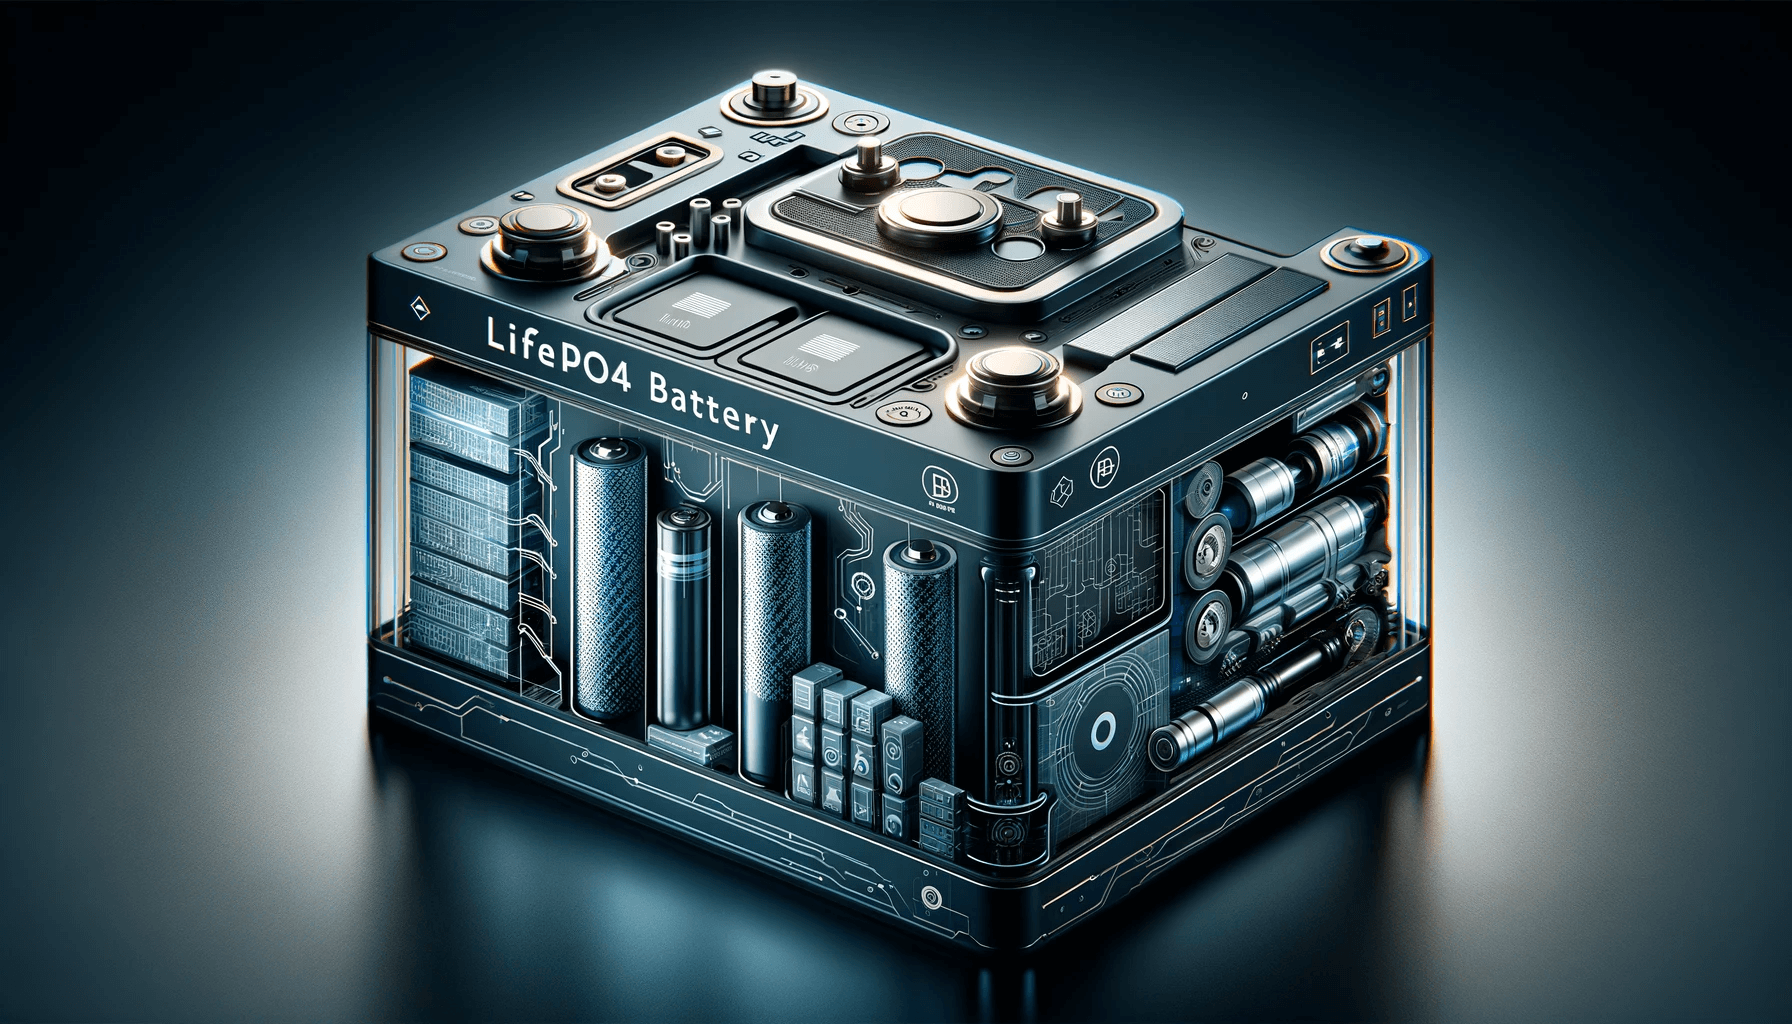 A sophisticated and modern design of a LiFePO4 battery, showcasing its internal structure and components. The image should illustrate the battery